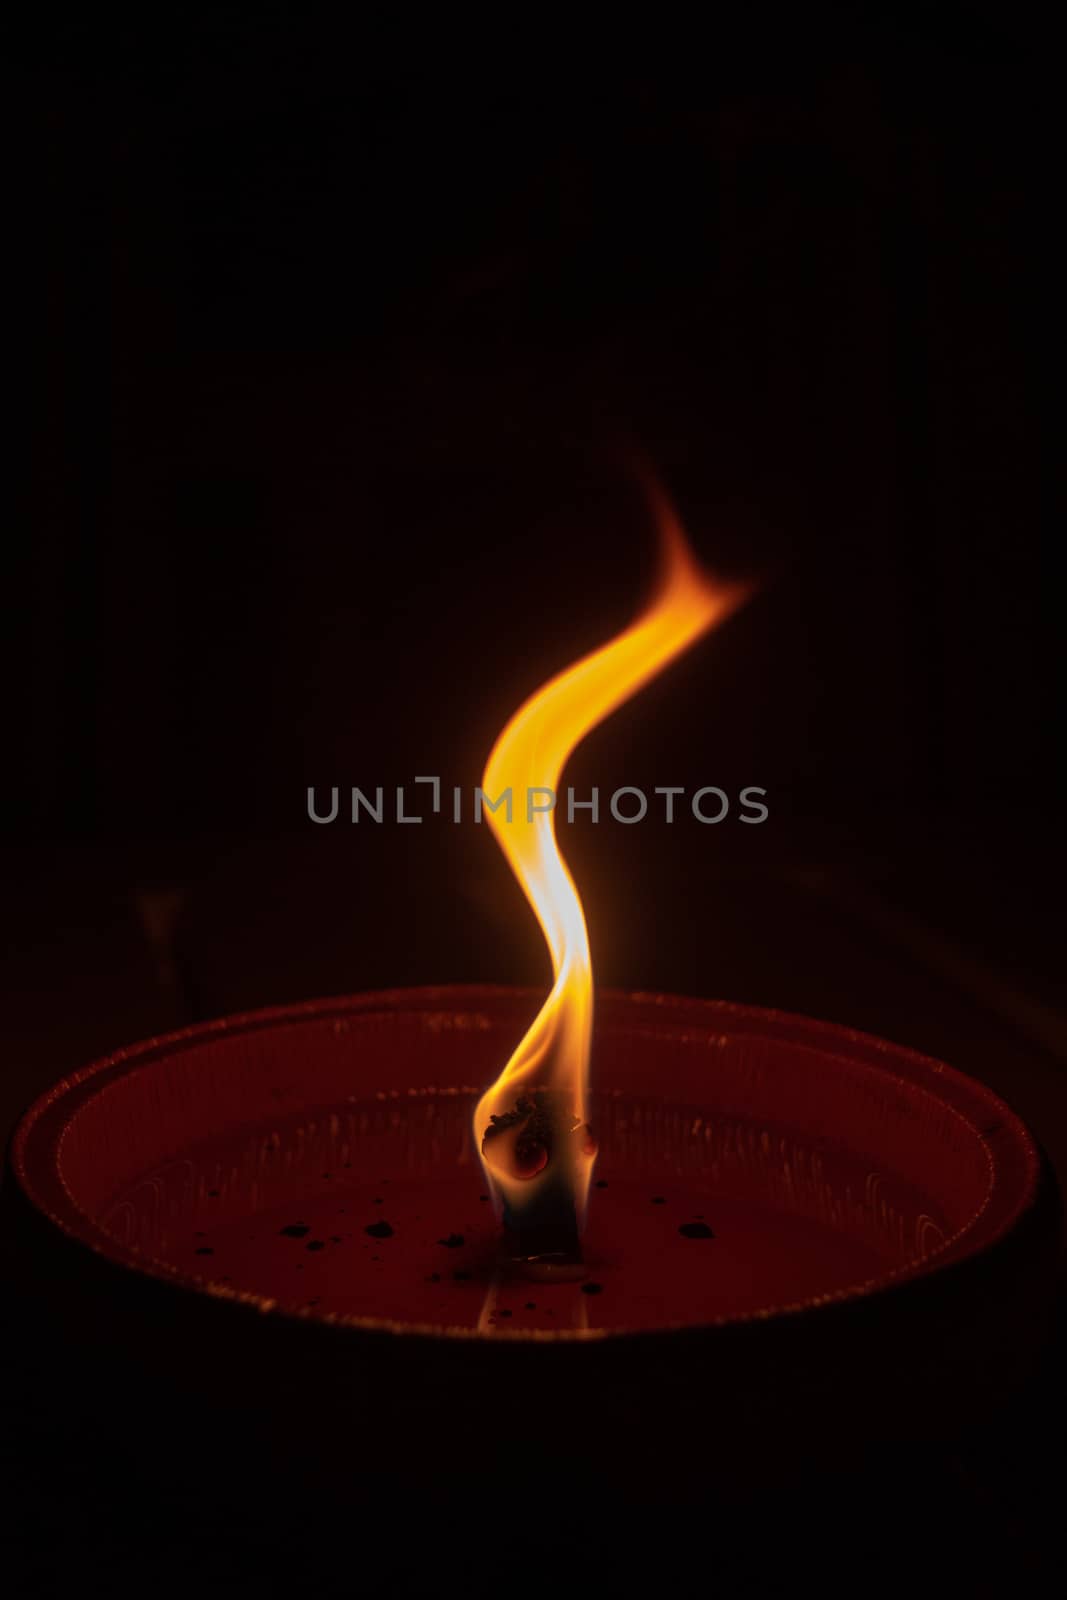 Candle flame close up on dark background, interesting flame figure by asafaric